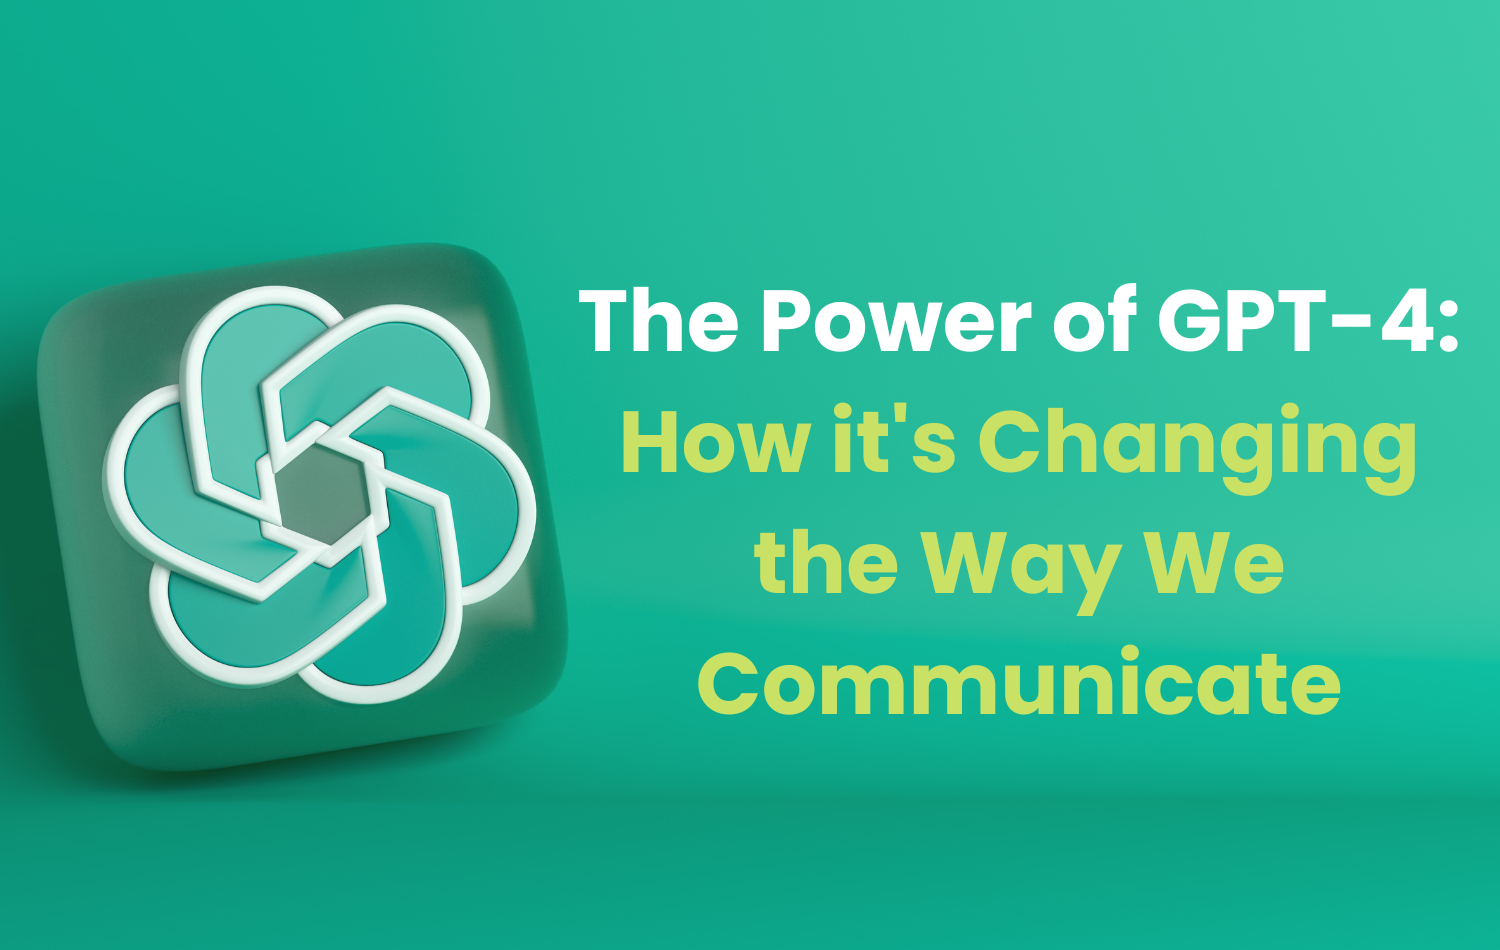 The Power of GPT-4: How it’s Changing the Way We Communicate